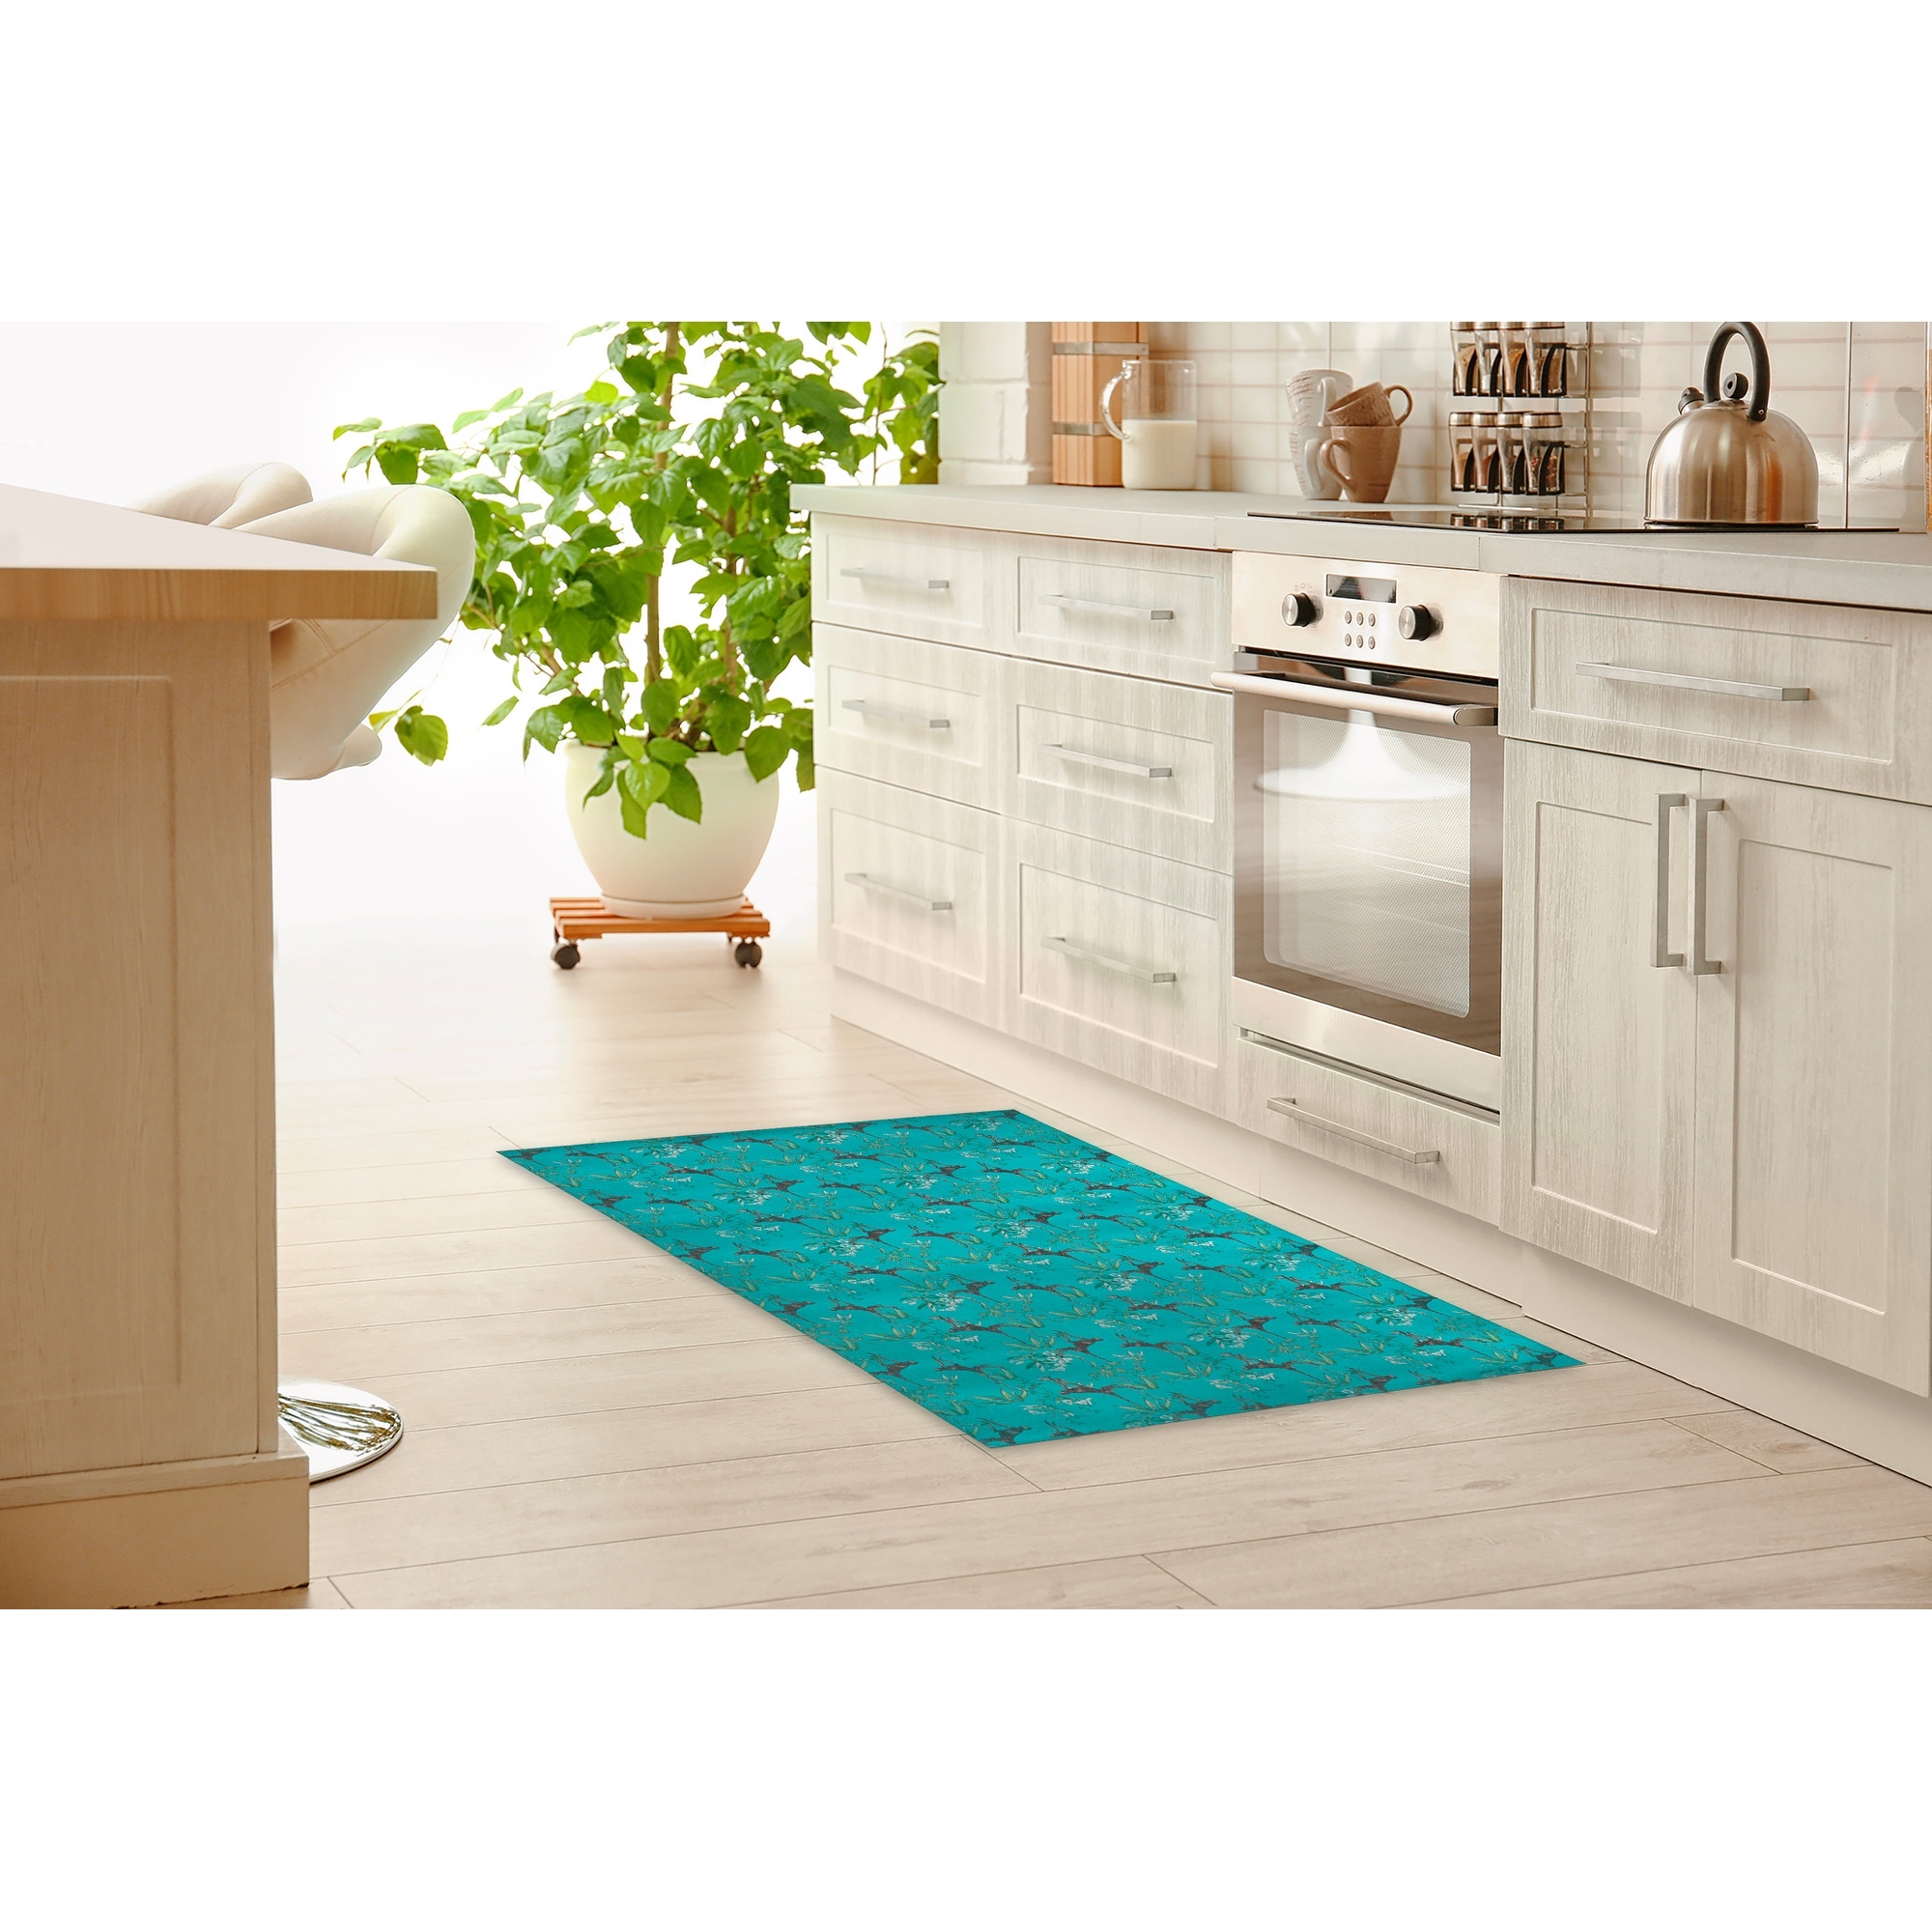 https://ak1.ostkcdn.com/images/products/is/images/direct/e2b5d978e97770484bb7ca868f3c92b0f1c470f9/HANGIN-OUT-Kitchen-Mat-By-Kavka-Designs.jpg